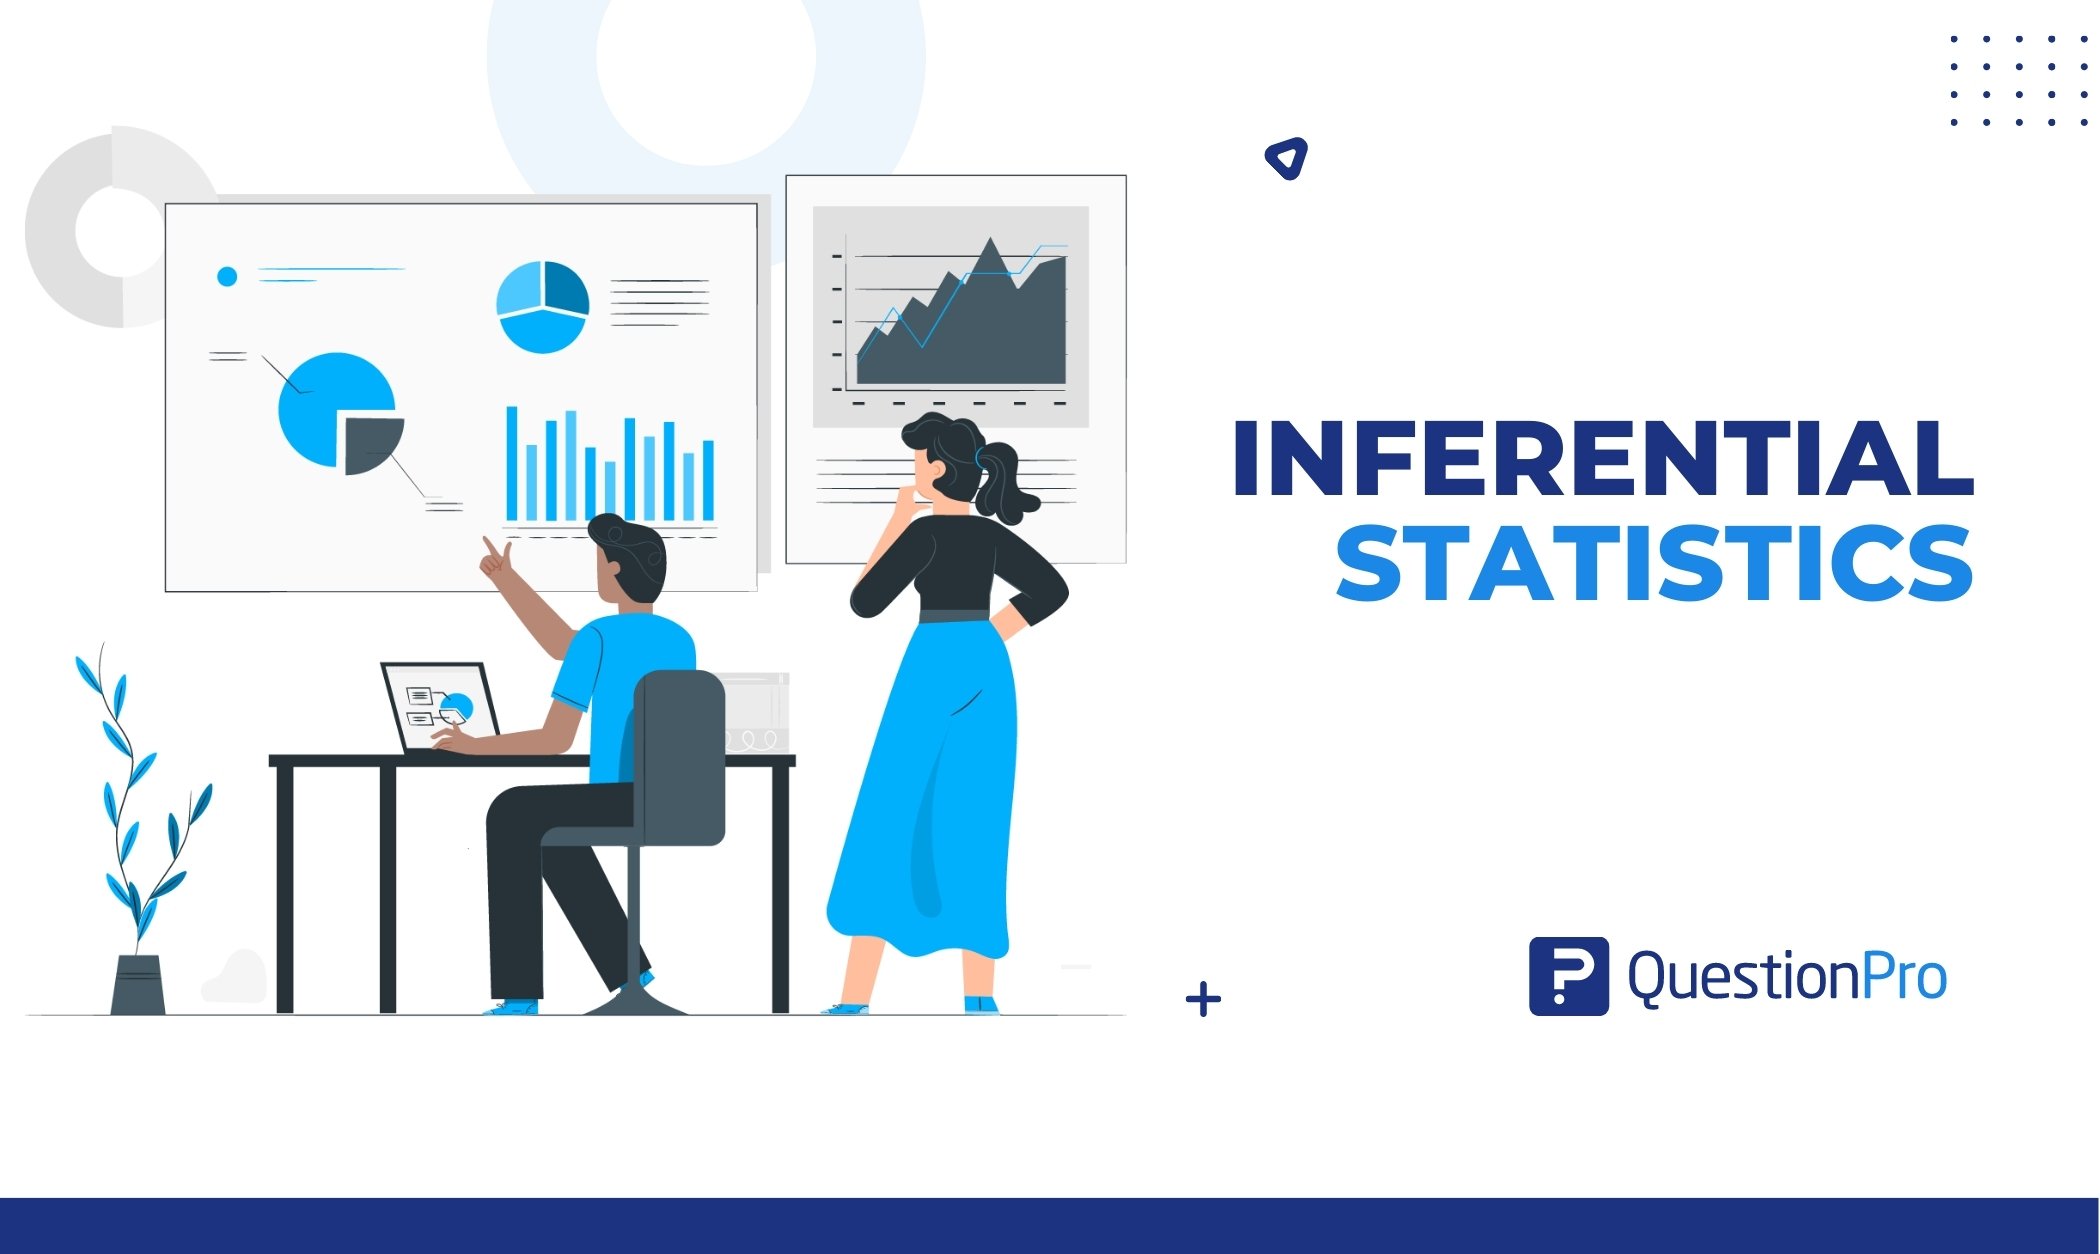 Inferential statistics use analytical procedures to draw conclusions about survey data from sample data. Let's learn about it.